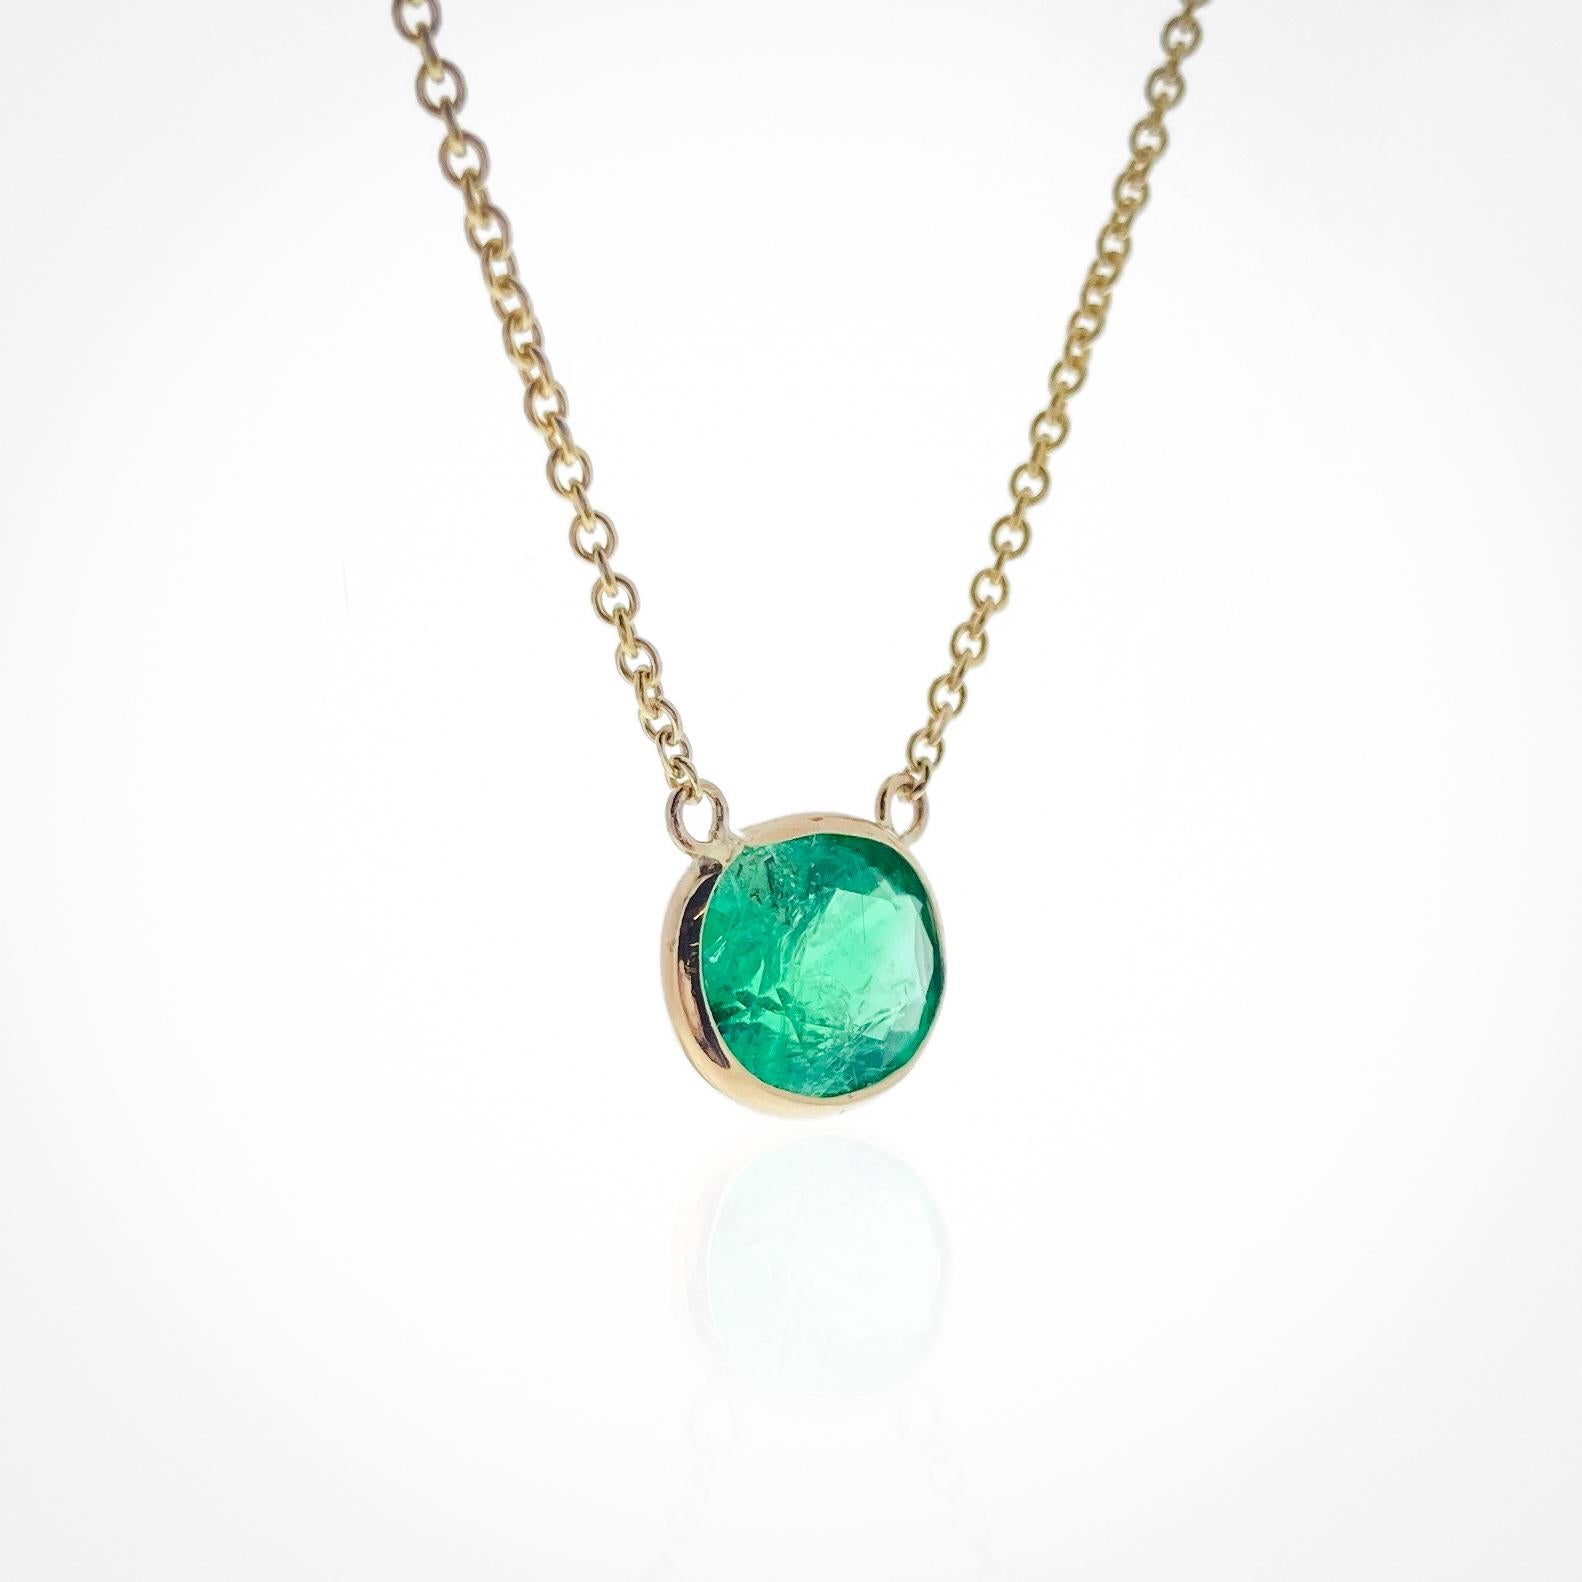 Contemporary 1.96 Carat Green Emerald Oval Cut Fashion Necklaces In 14K Yellow Gold For Sale